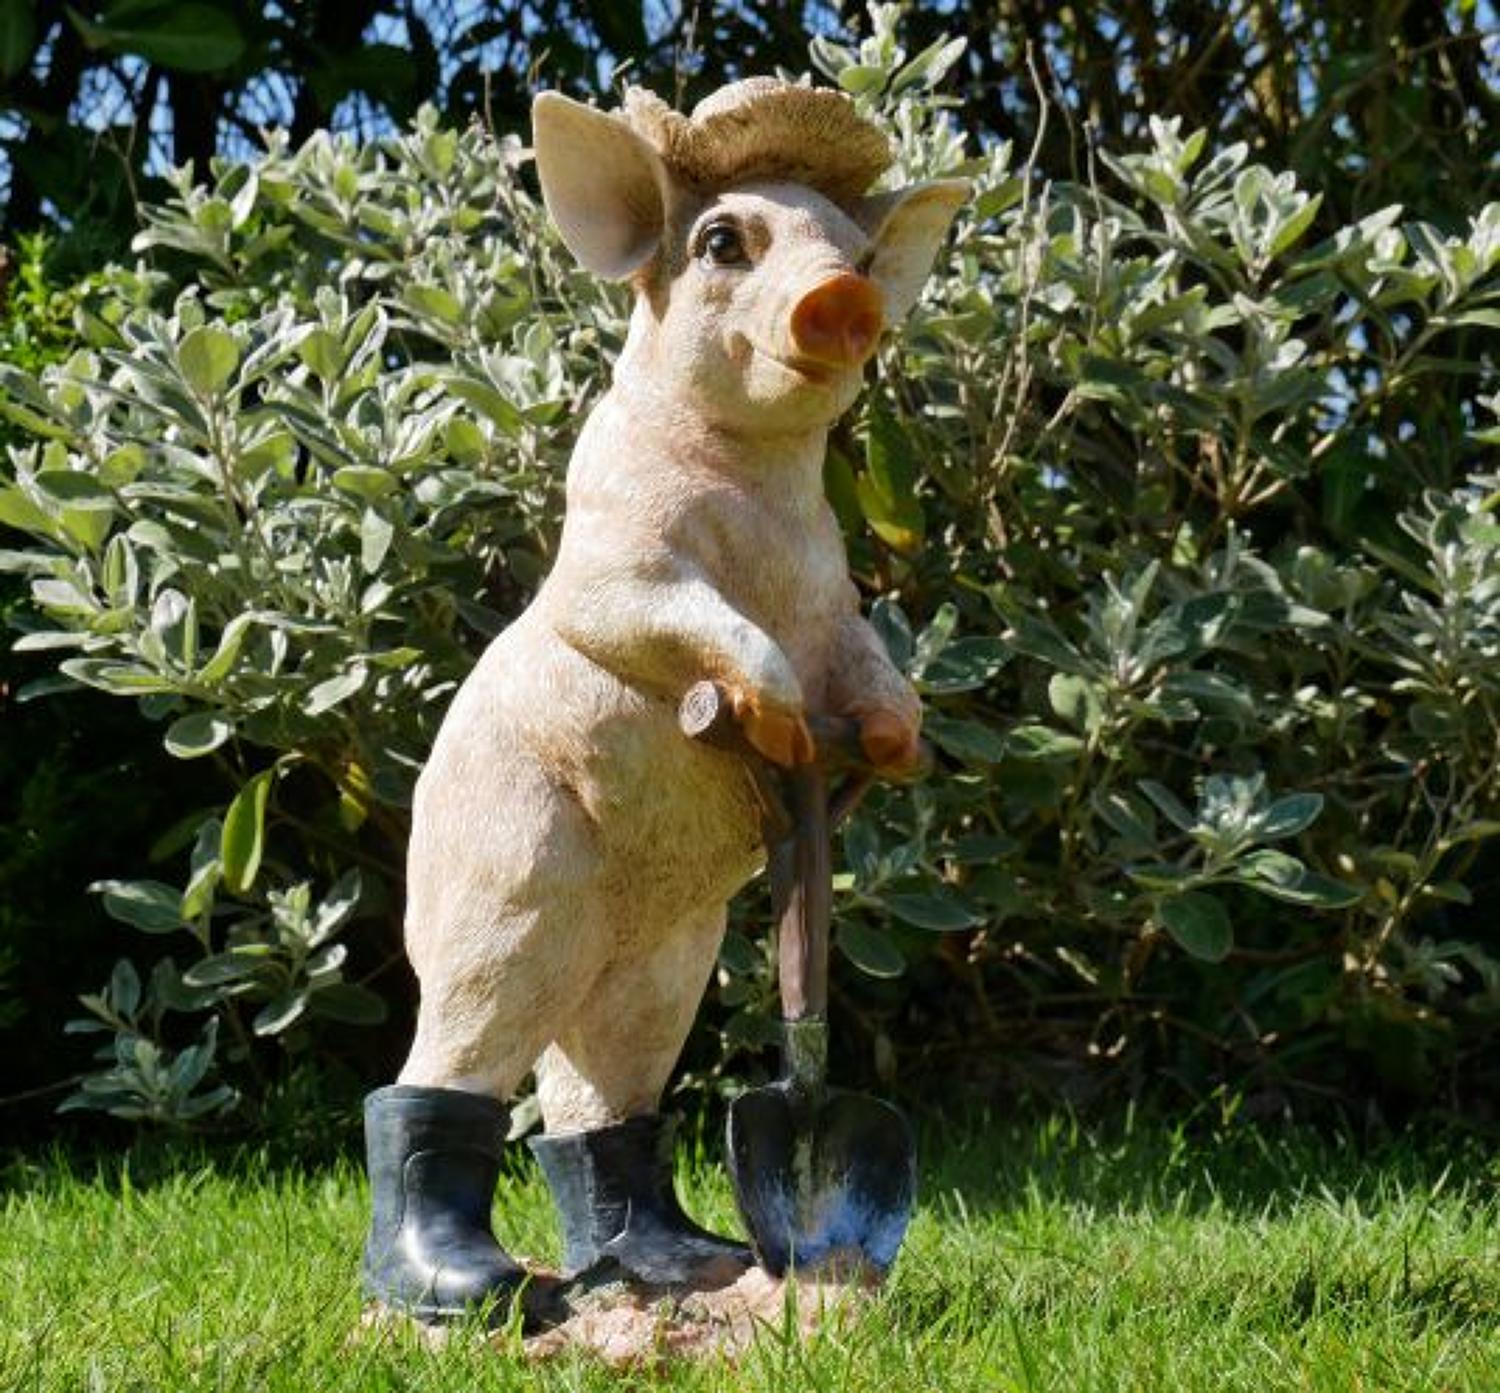 Pig in boots with spade